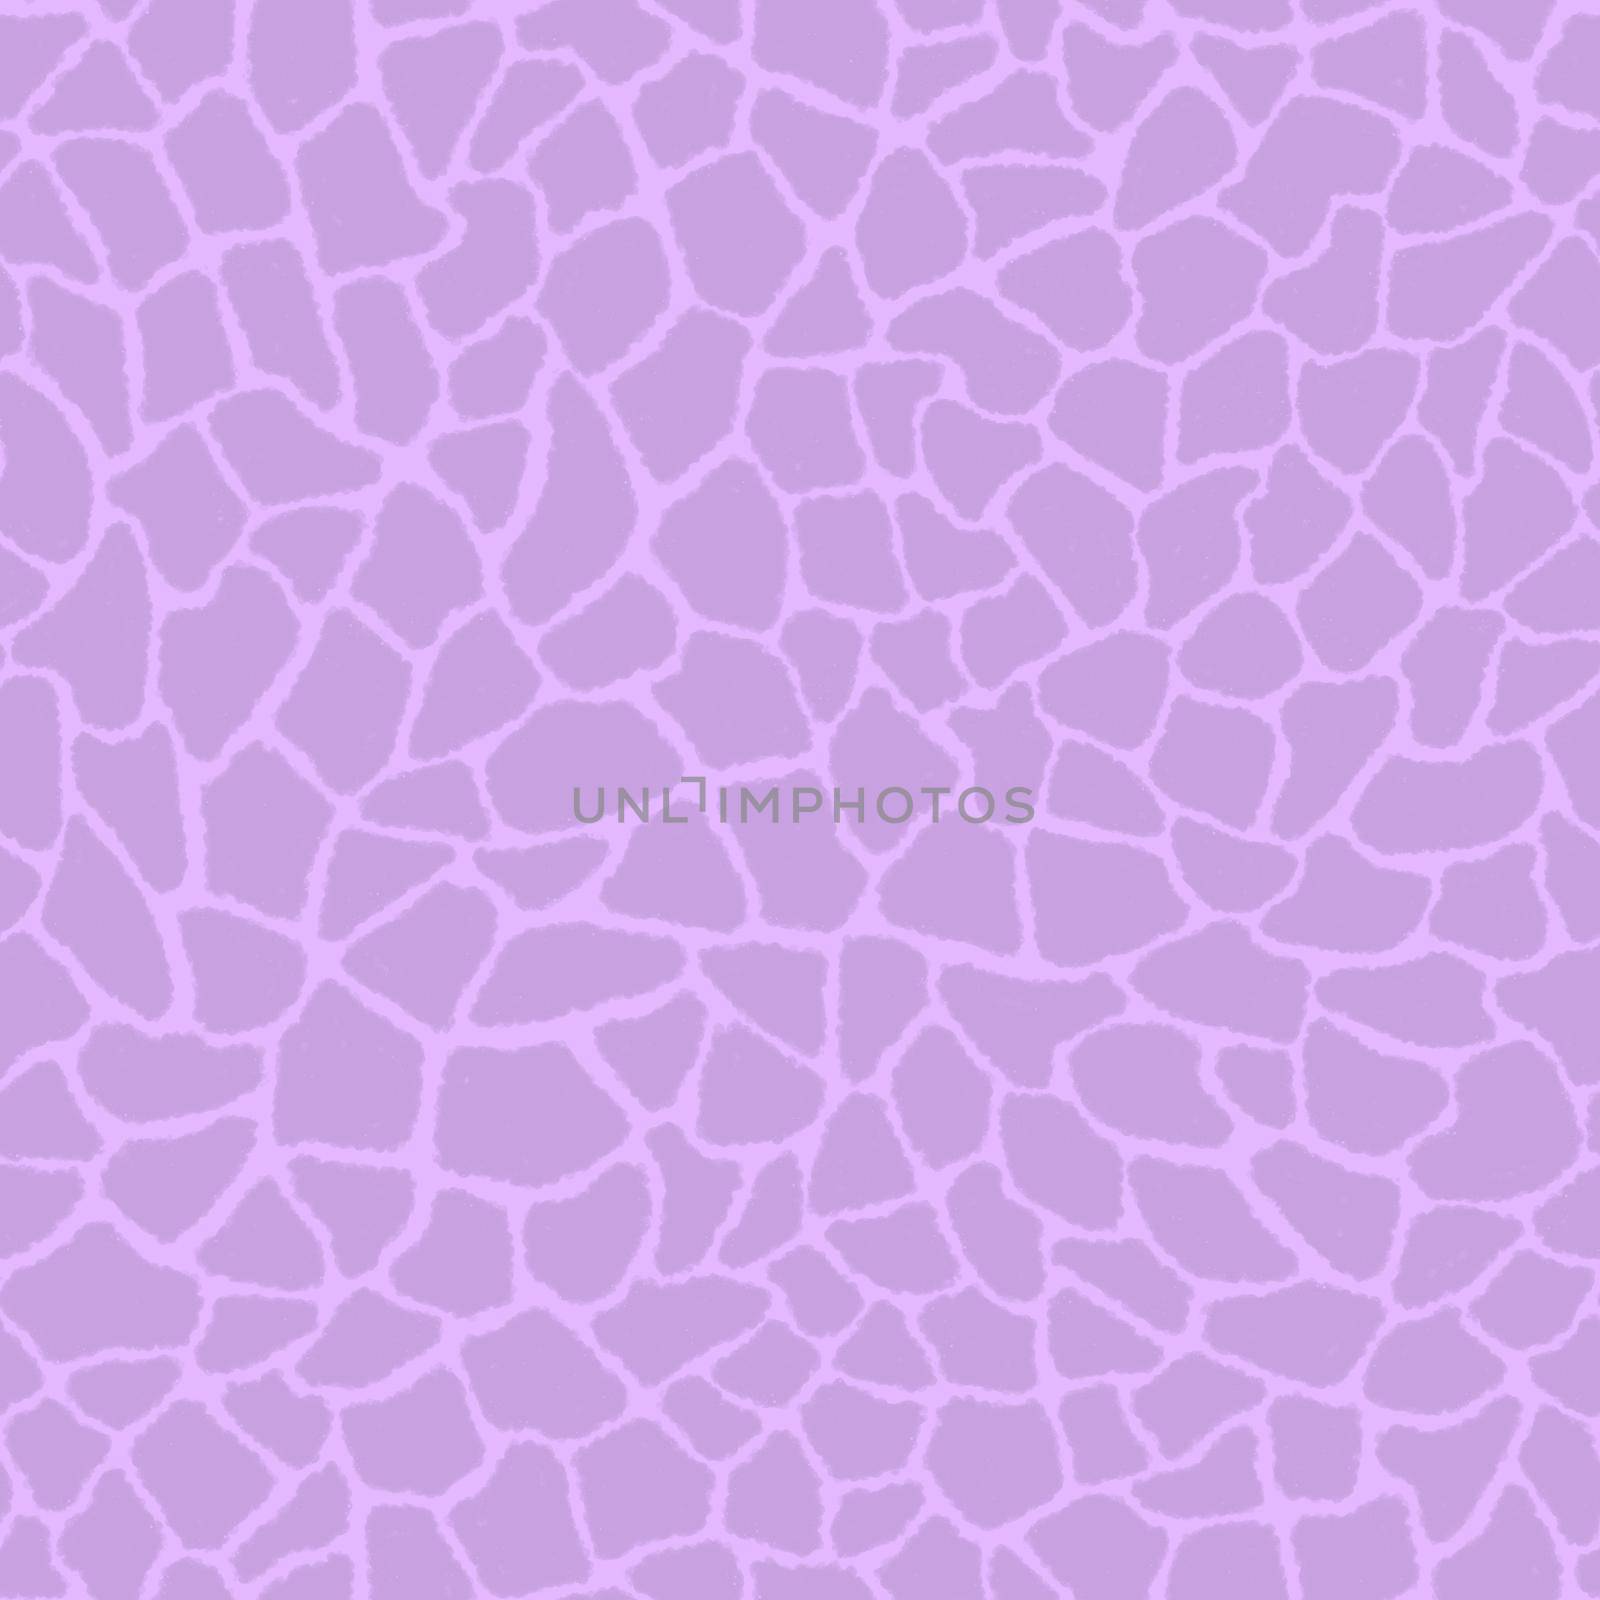 Giraffe skin color seamless pattern with fashion animal print for continuous replicate. Chaotic mosaic lilac pieces on pink background. Wrapping paper, funny textile fabric print,design,decor by Angelsmoon